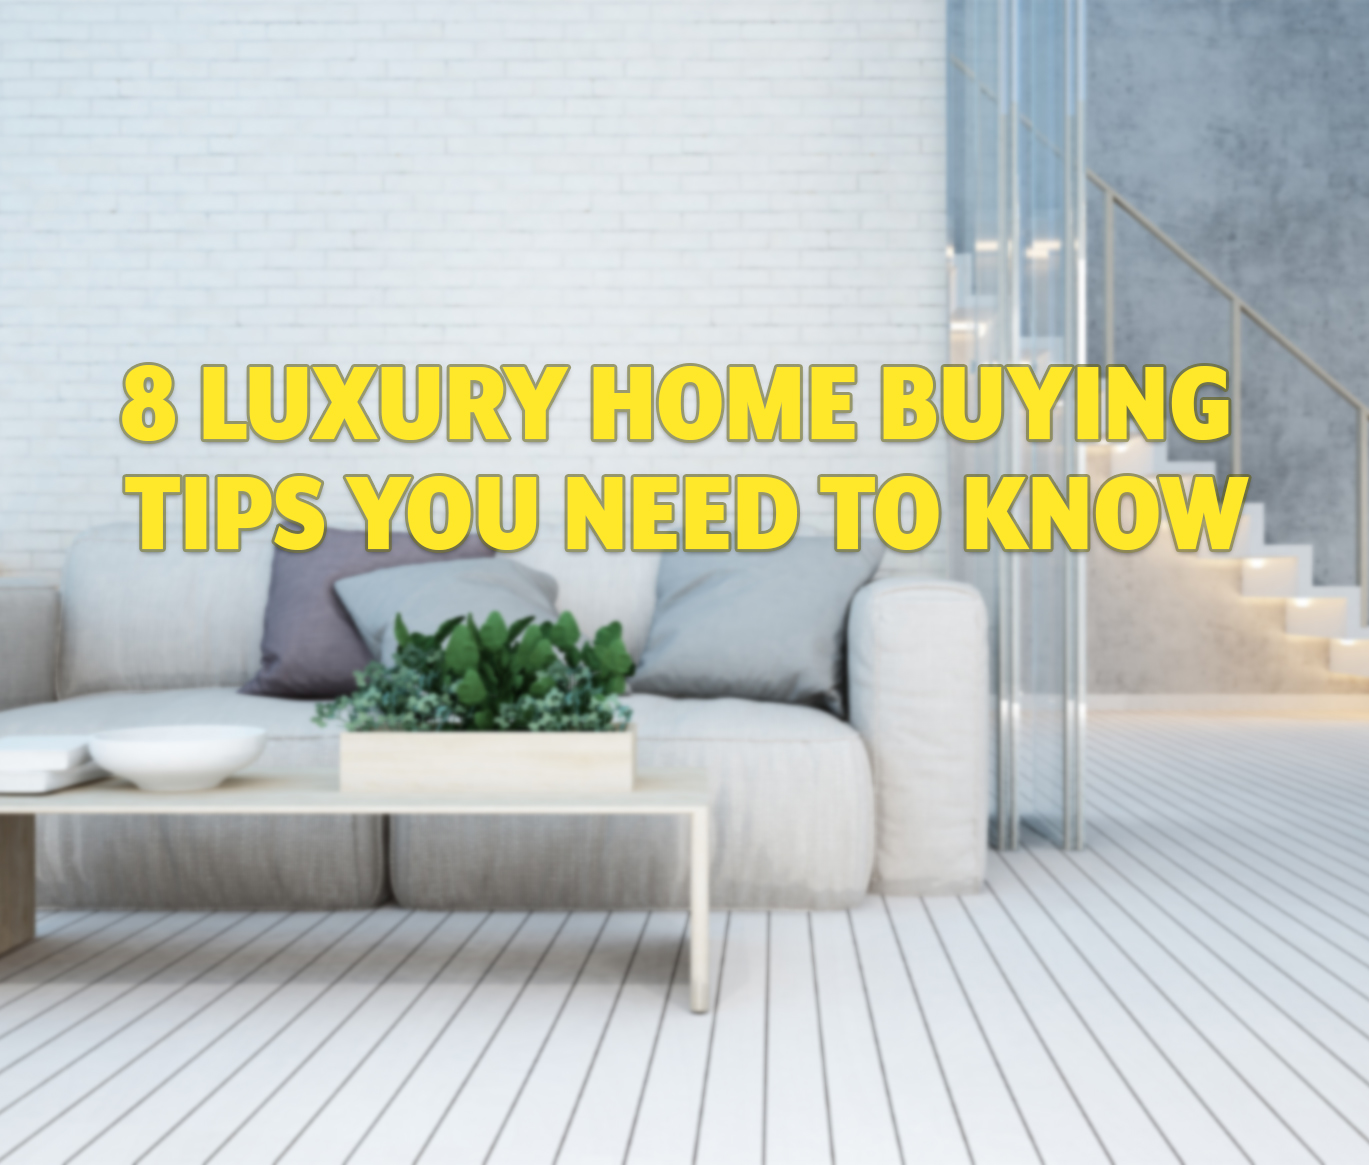 8 Luxury Home Buying Tips You Need to Know